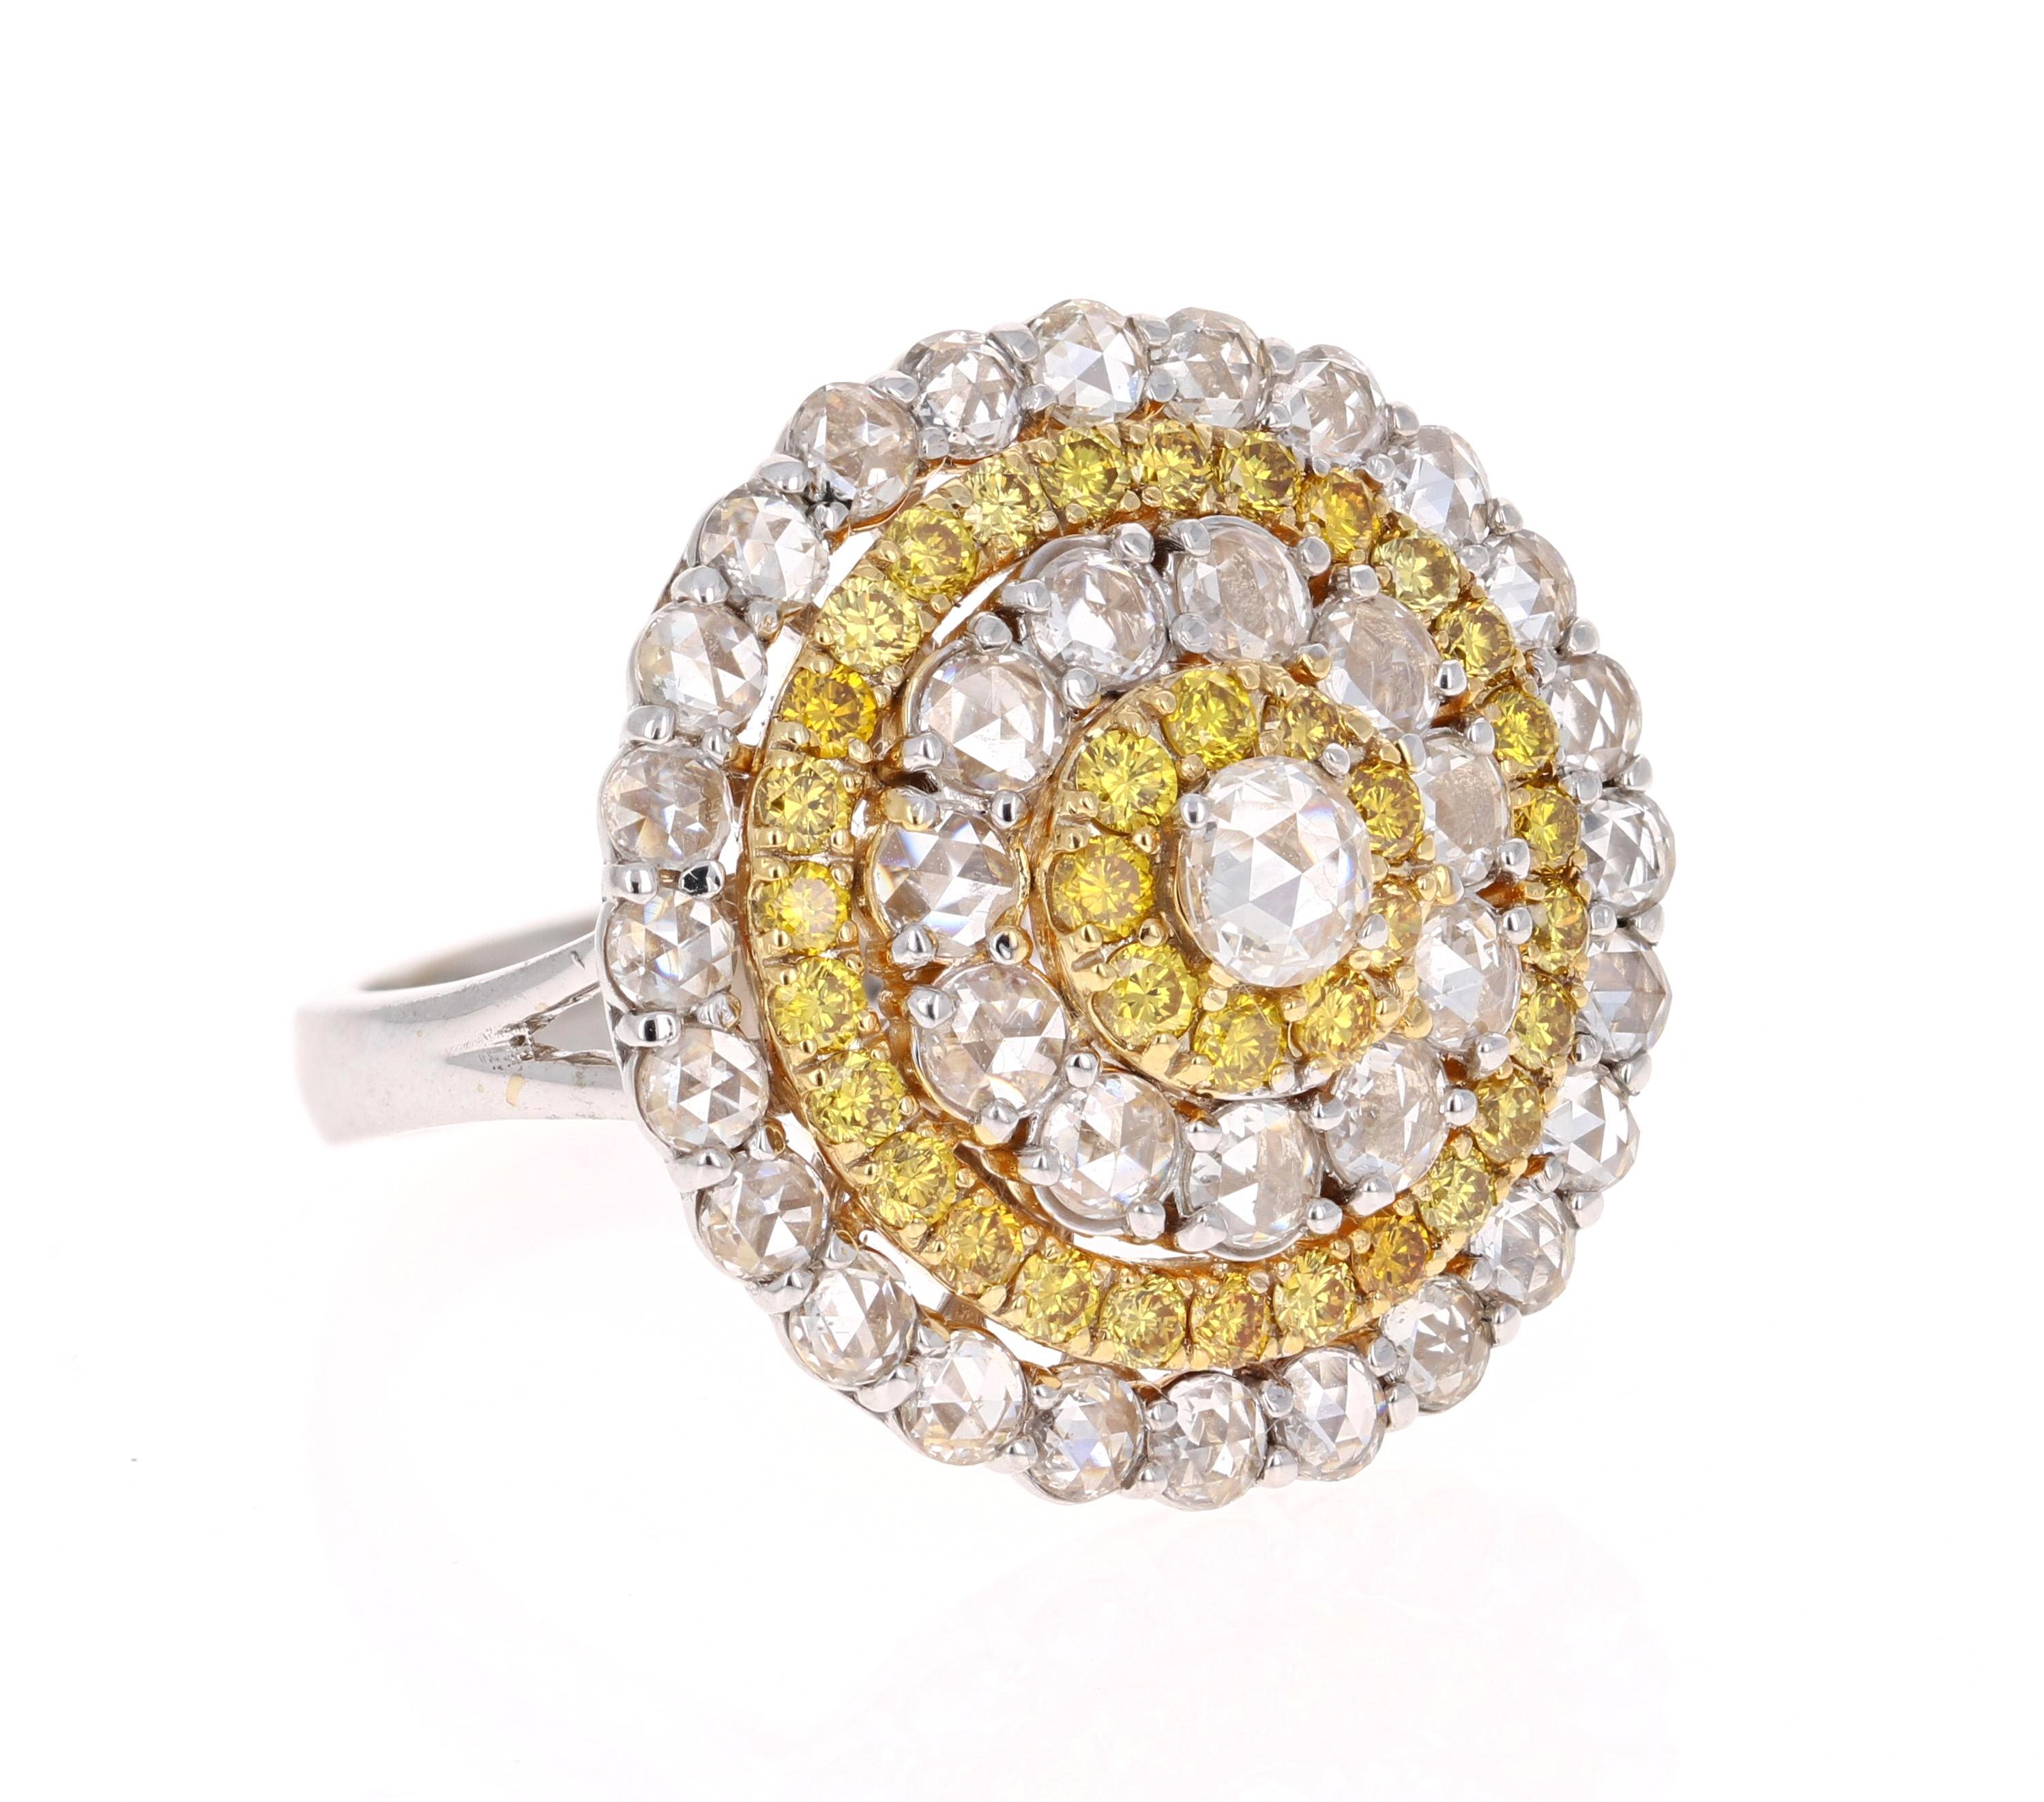 This magnificent beauty has a dome of 36 Rose Cut Diamonds that weigh 1.94 Carats. The clarity and color of the rose cuts are VS-F. It also has 36 beautiful & natural Yellow Round Cut Diamonds that weigh 0.98 Carats. The clarity of the yellow